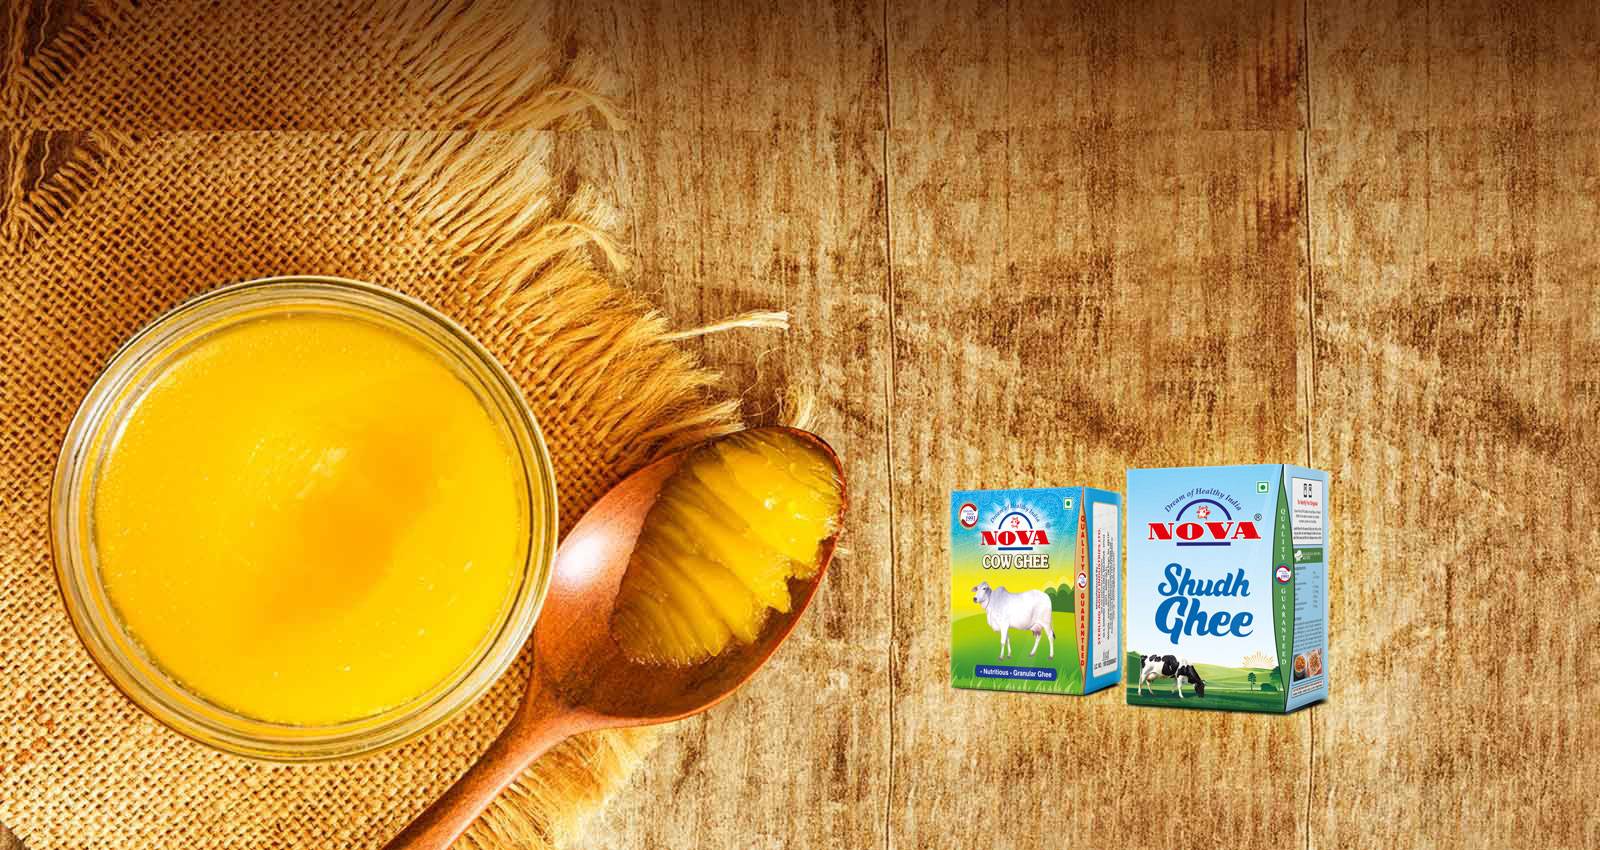 Nova Dairy: Dairy Companies in India | Best Dairy Products